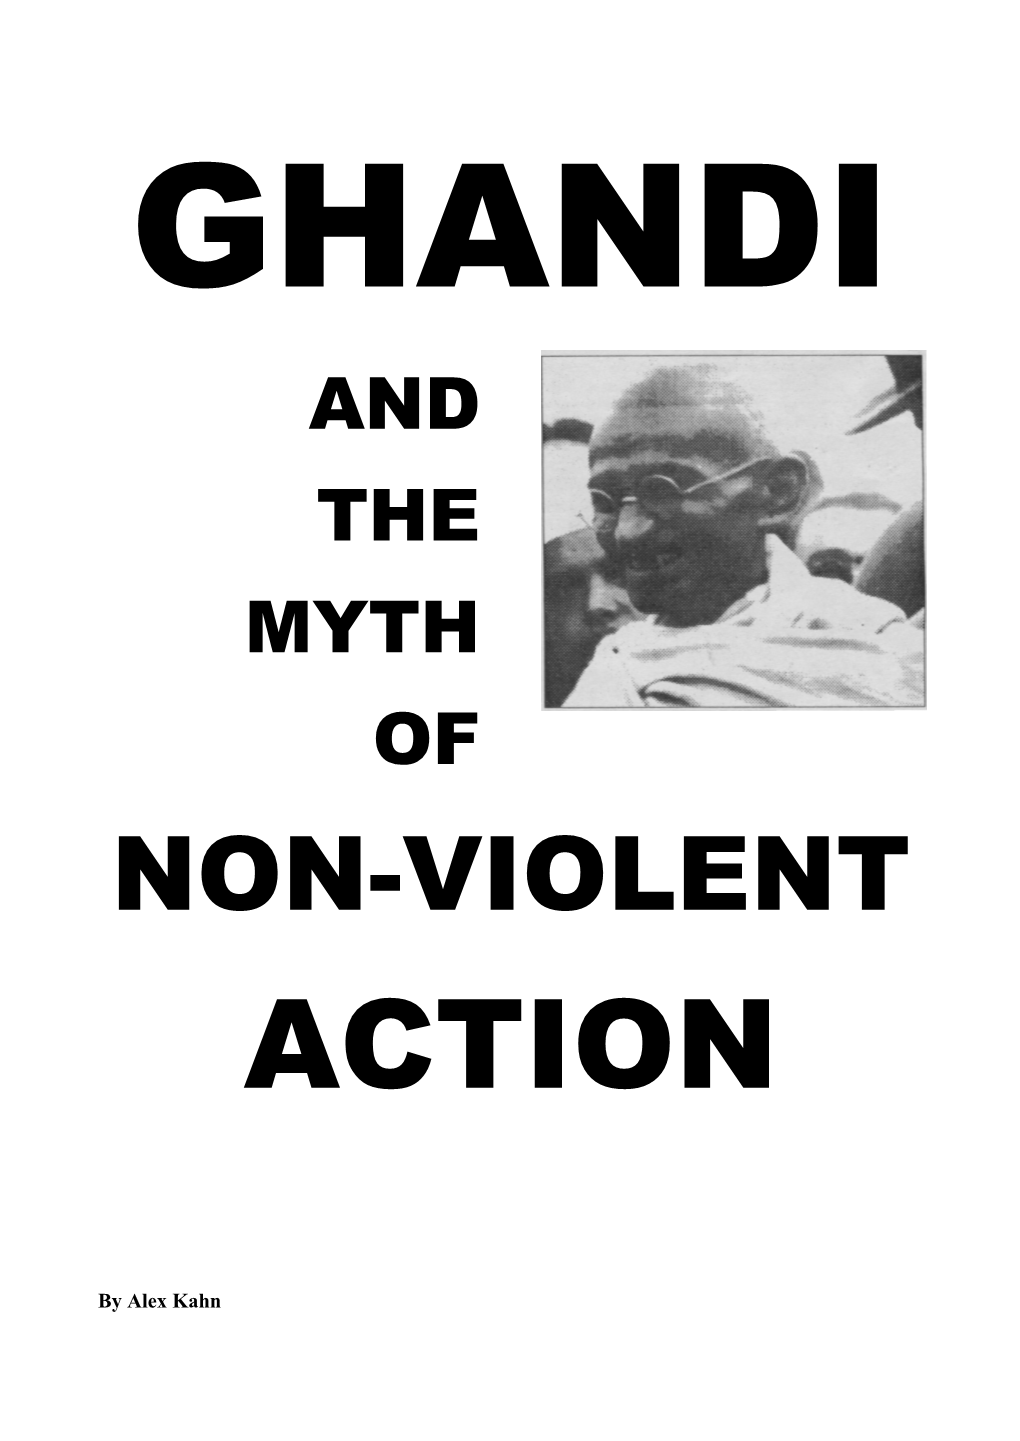 Gandhi and the Myth of Non-Violent Action